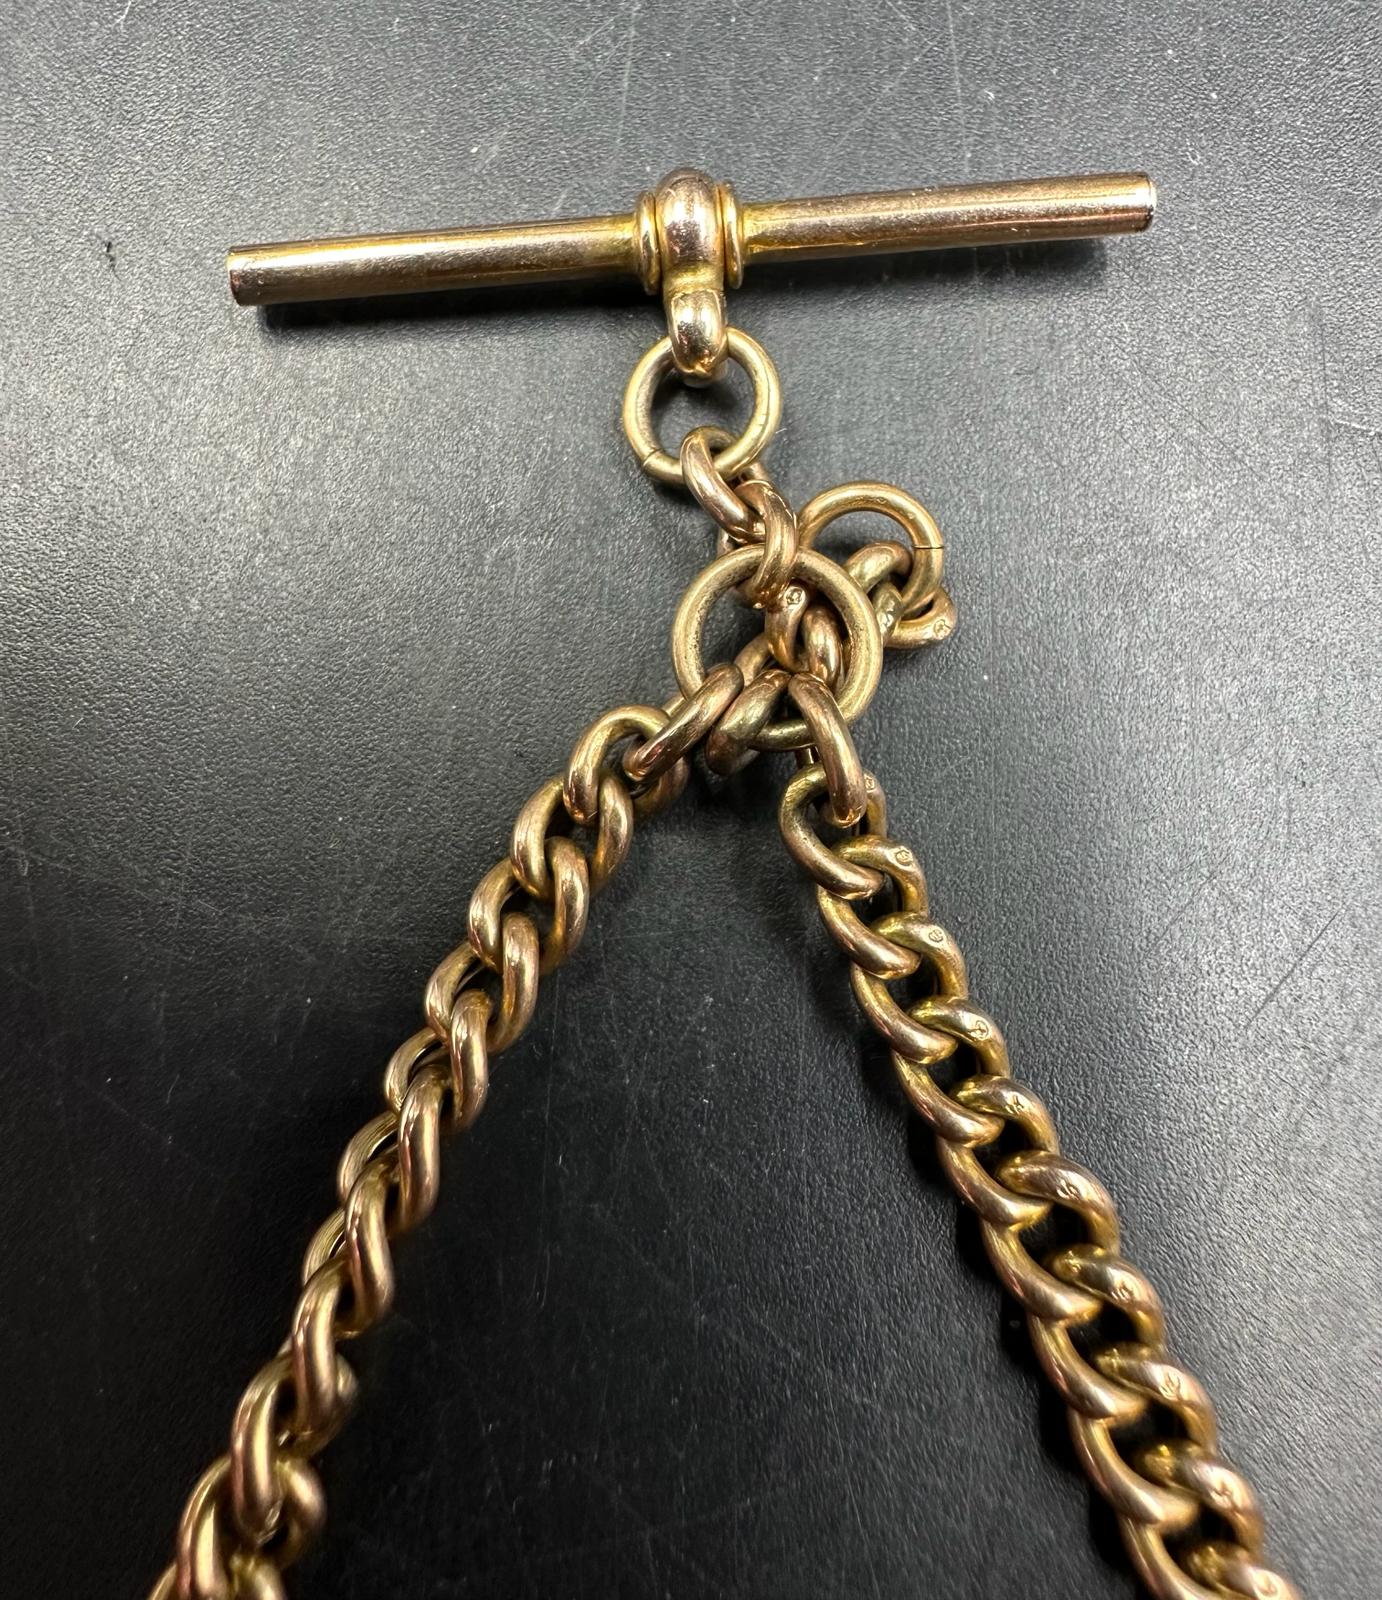 A 9ct gold Albert chain, curb link chain with lobster clasps and T - Bar attachment (Total weight - Image 7 of 8